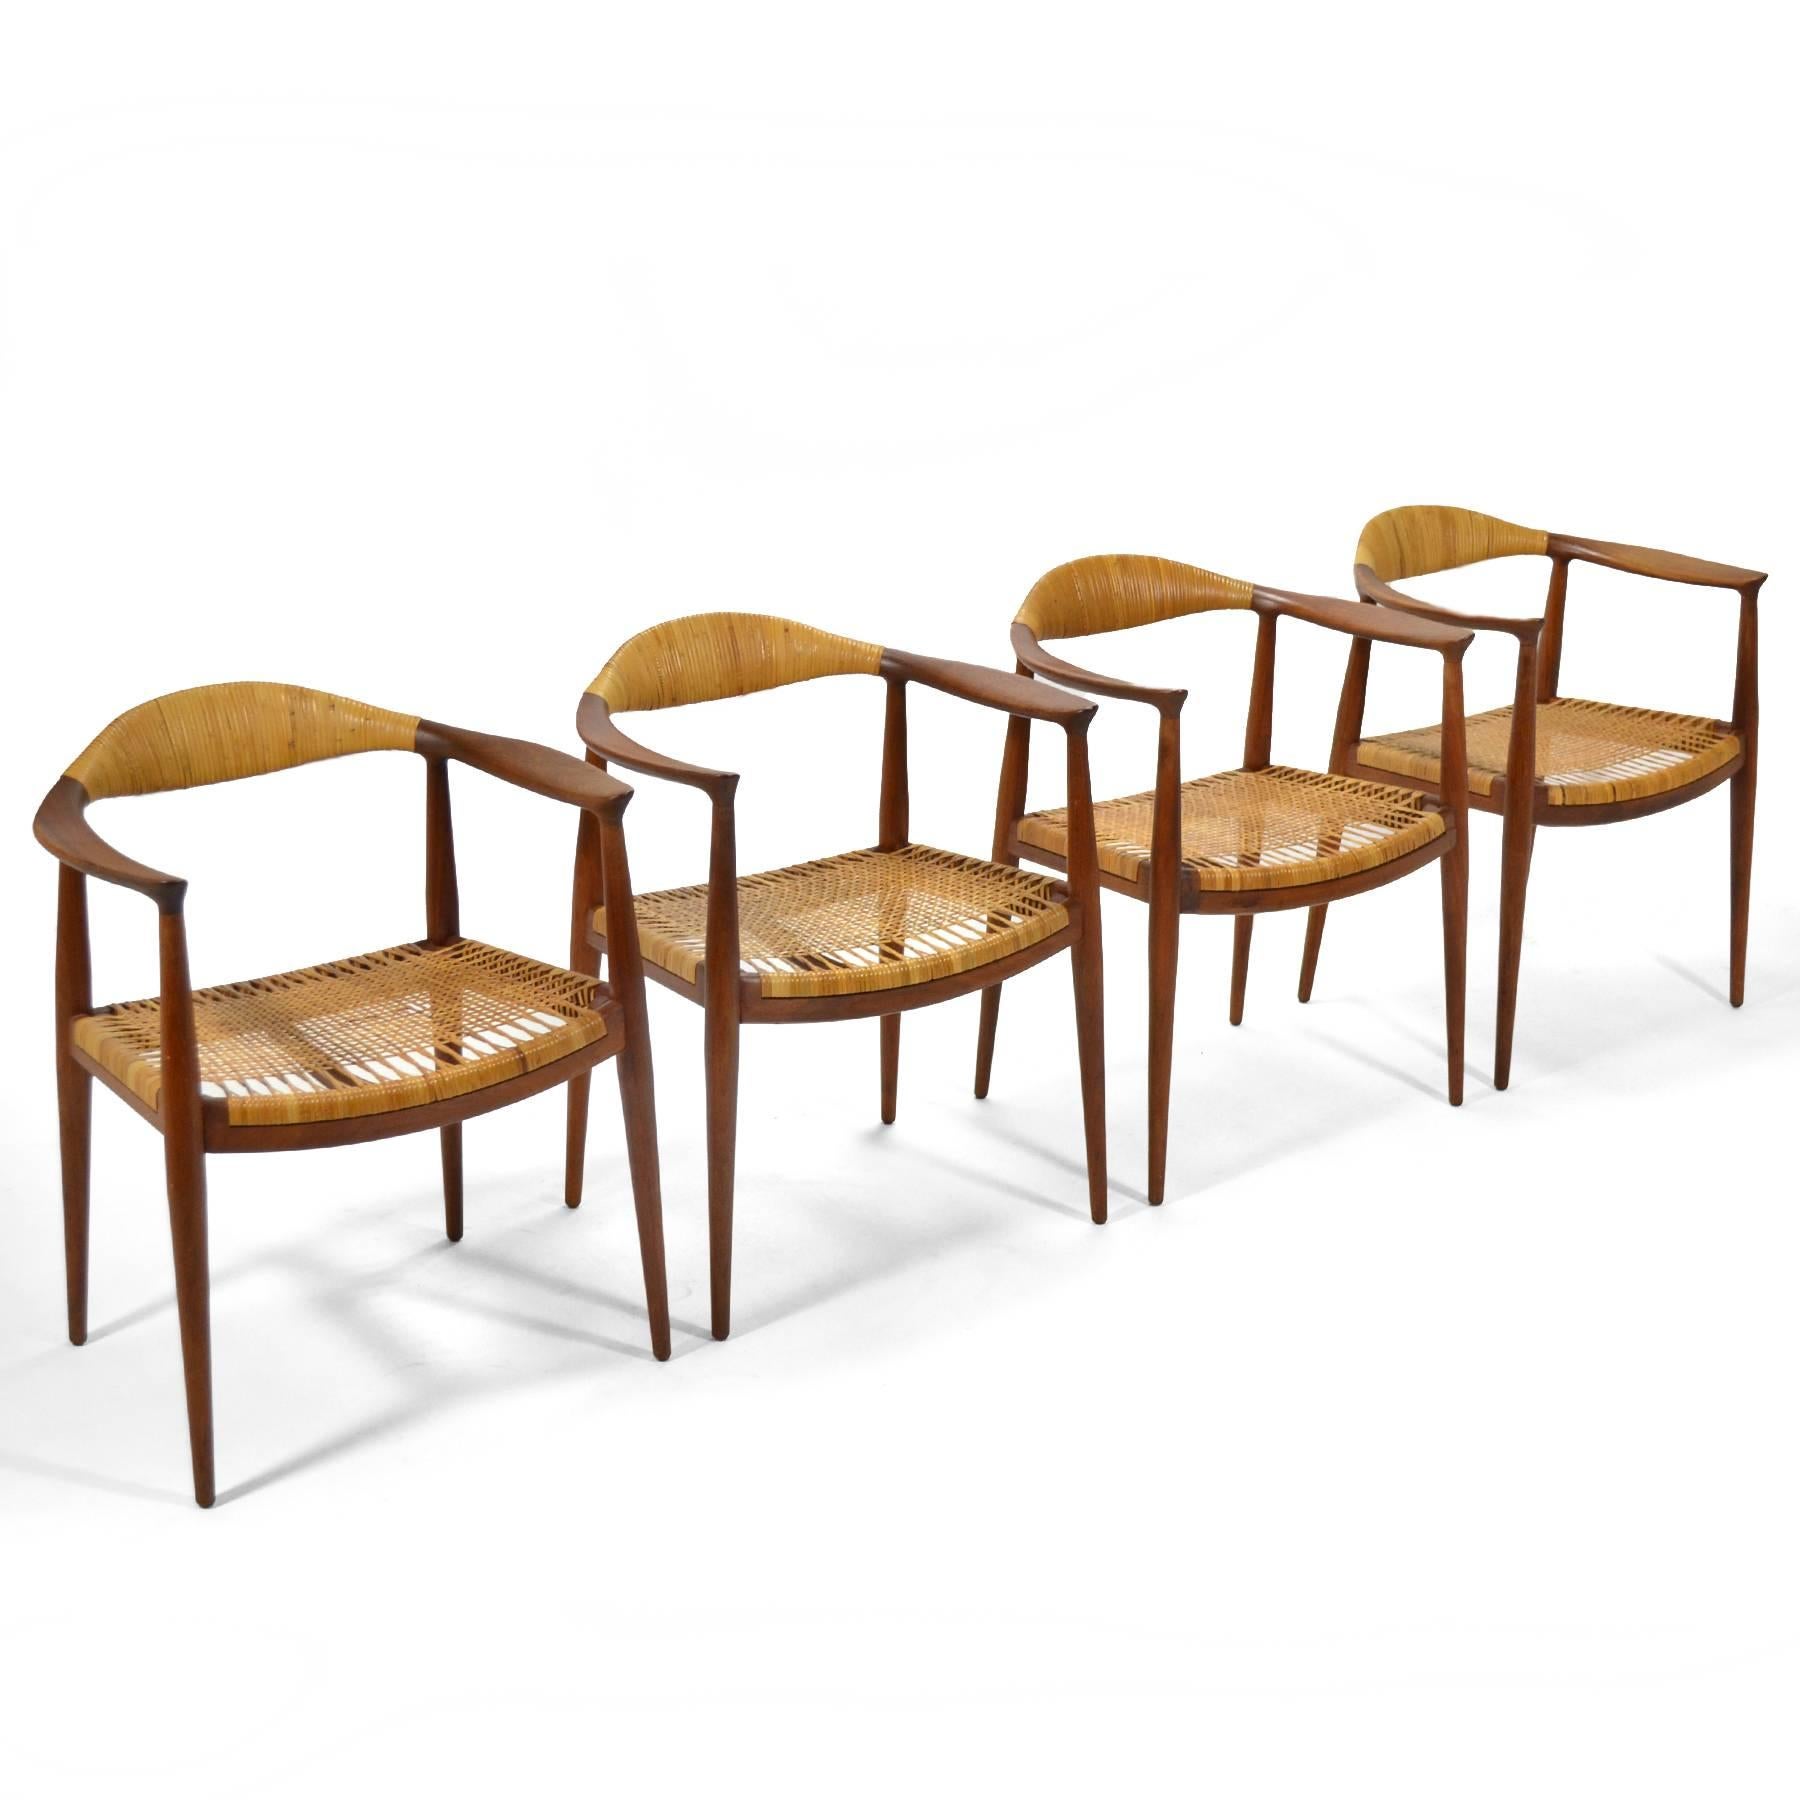 This set of four vintage chairs in the manner of Hans Wegner are very well executed. They have teak frames, cane seats and cane-wrapped backs.